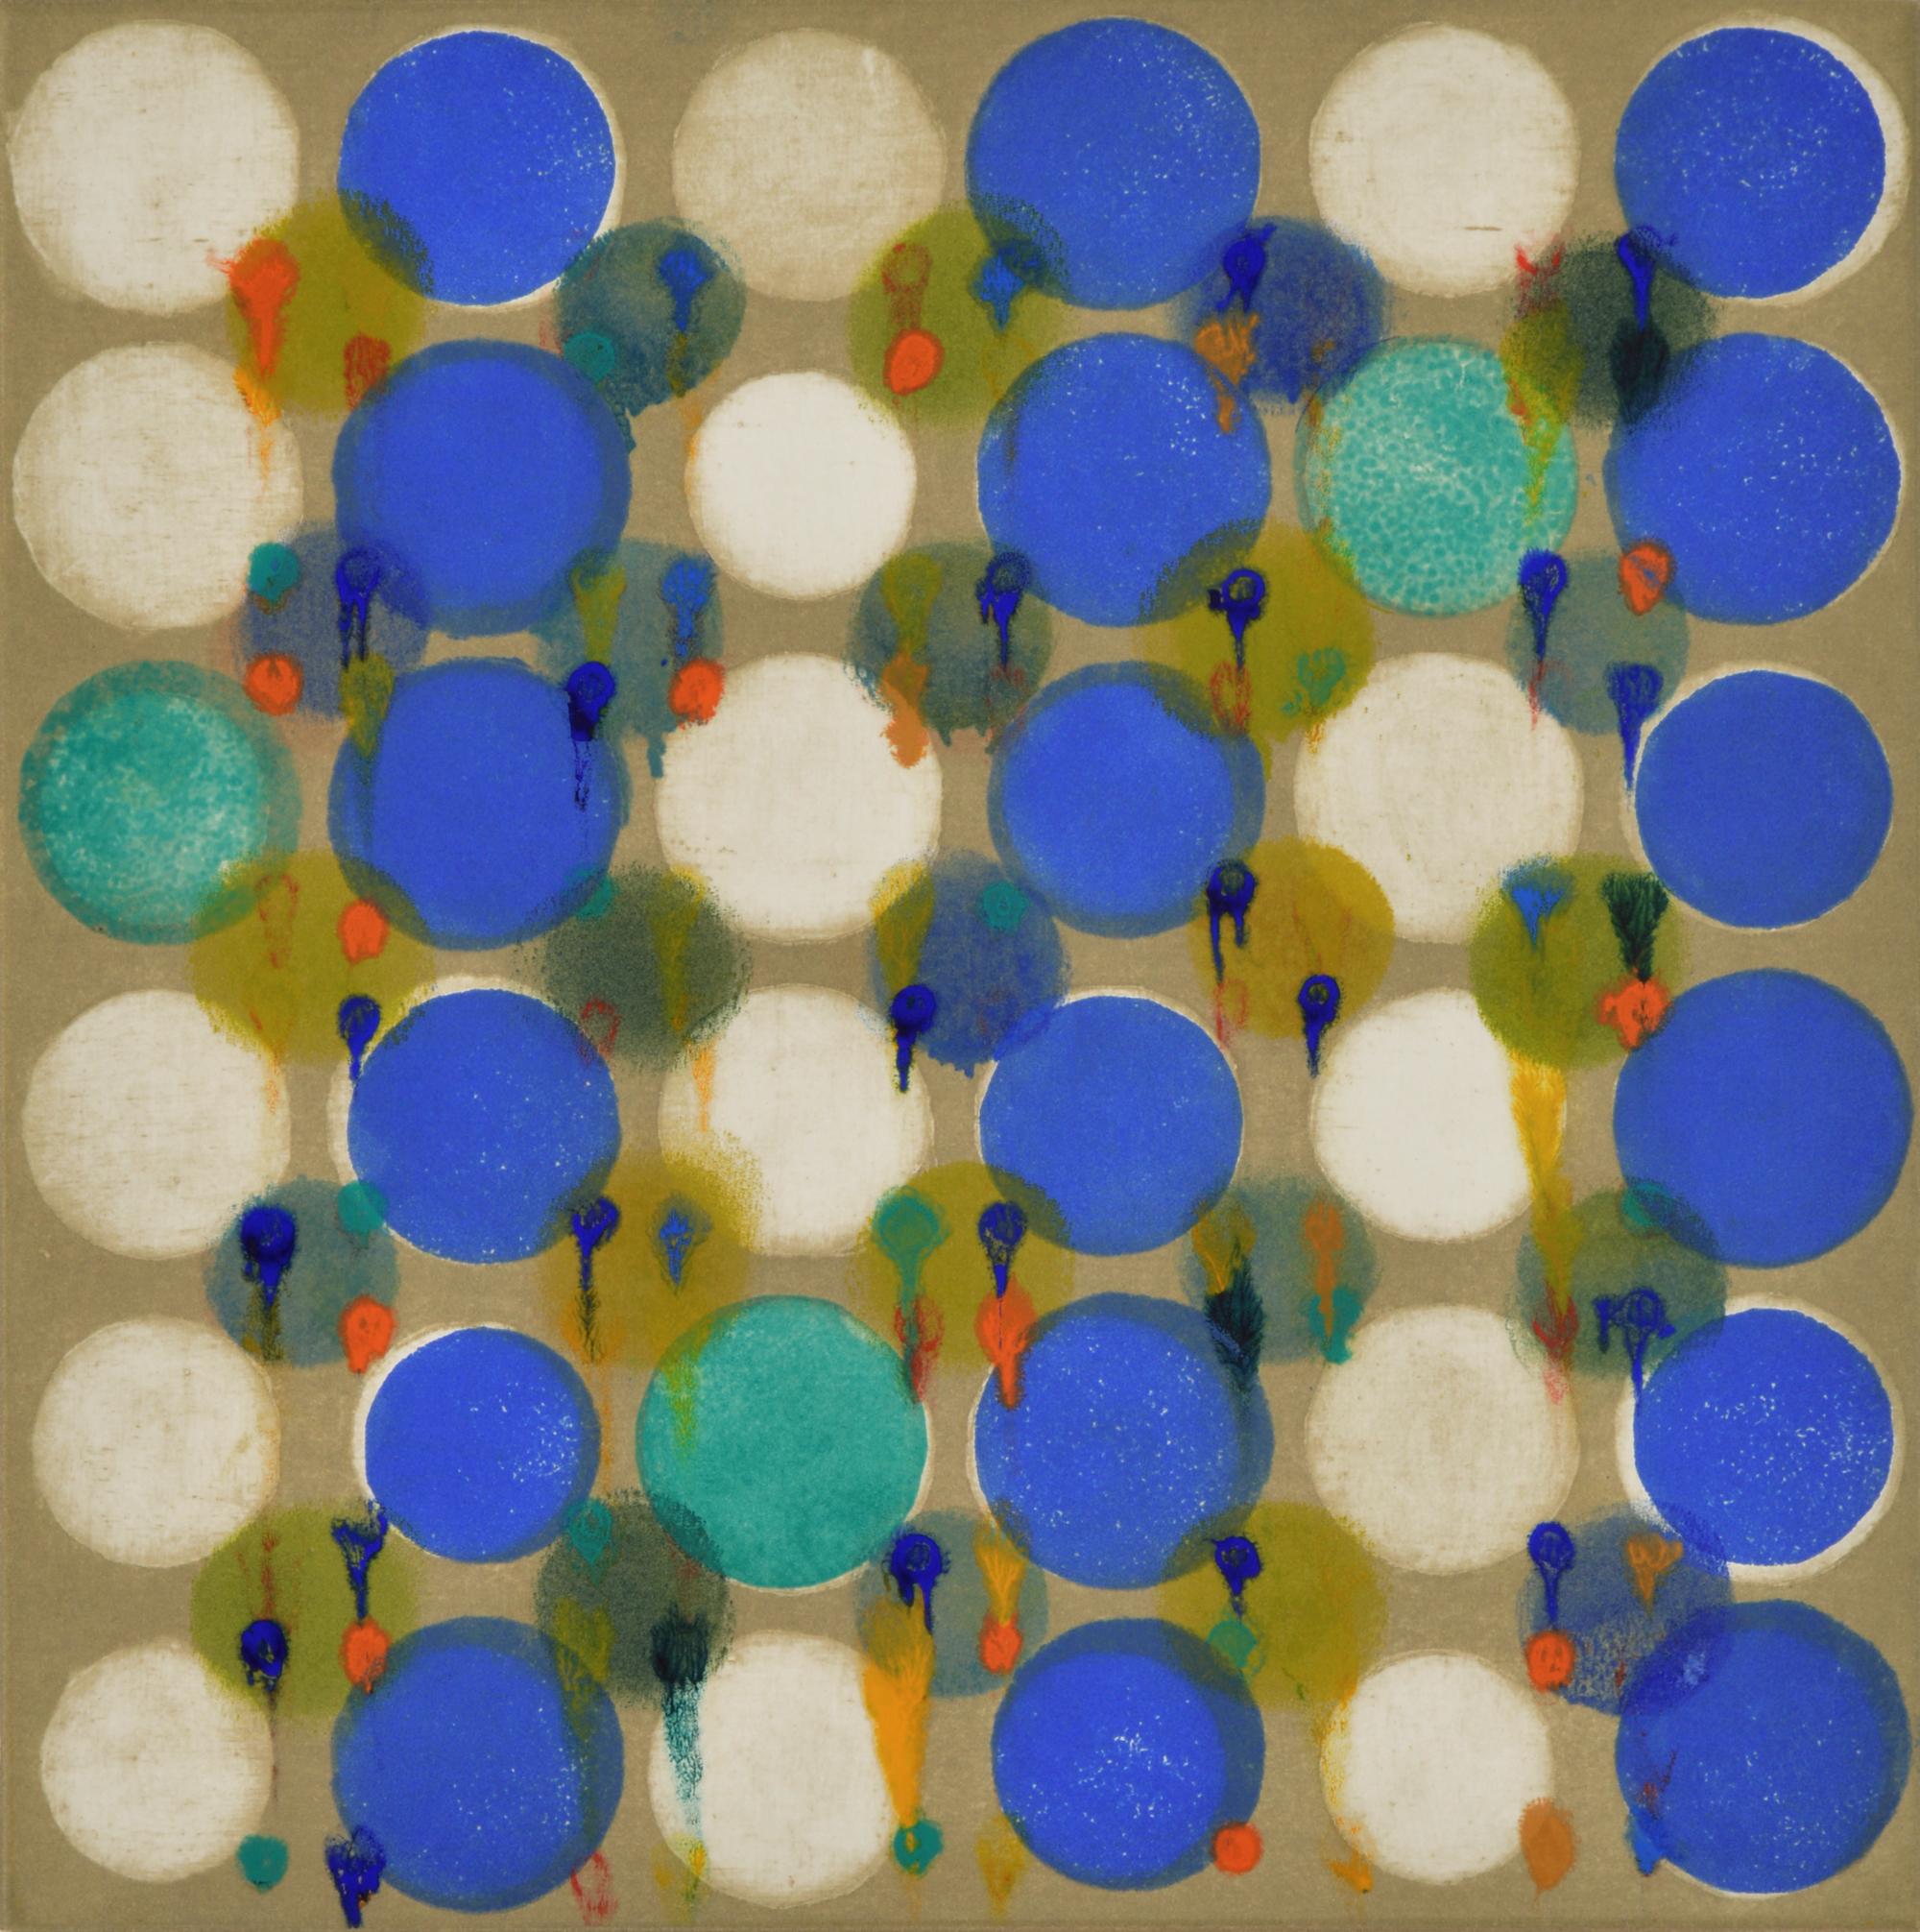 Janine Wong Abstract Print - "Dot Variant 28", color dots, abstract, pattern, blue, teal, orange, ochre